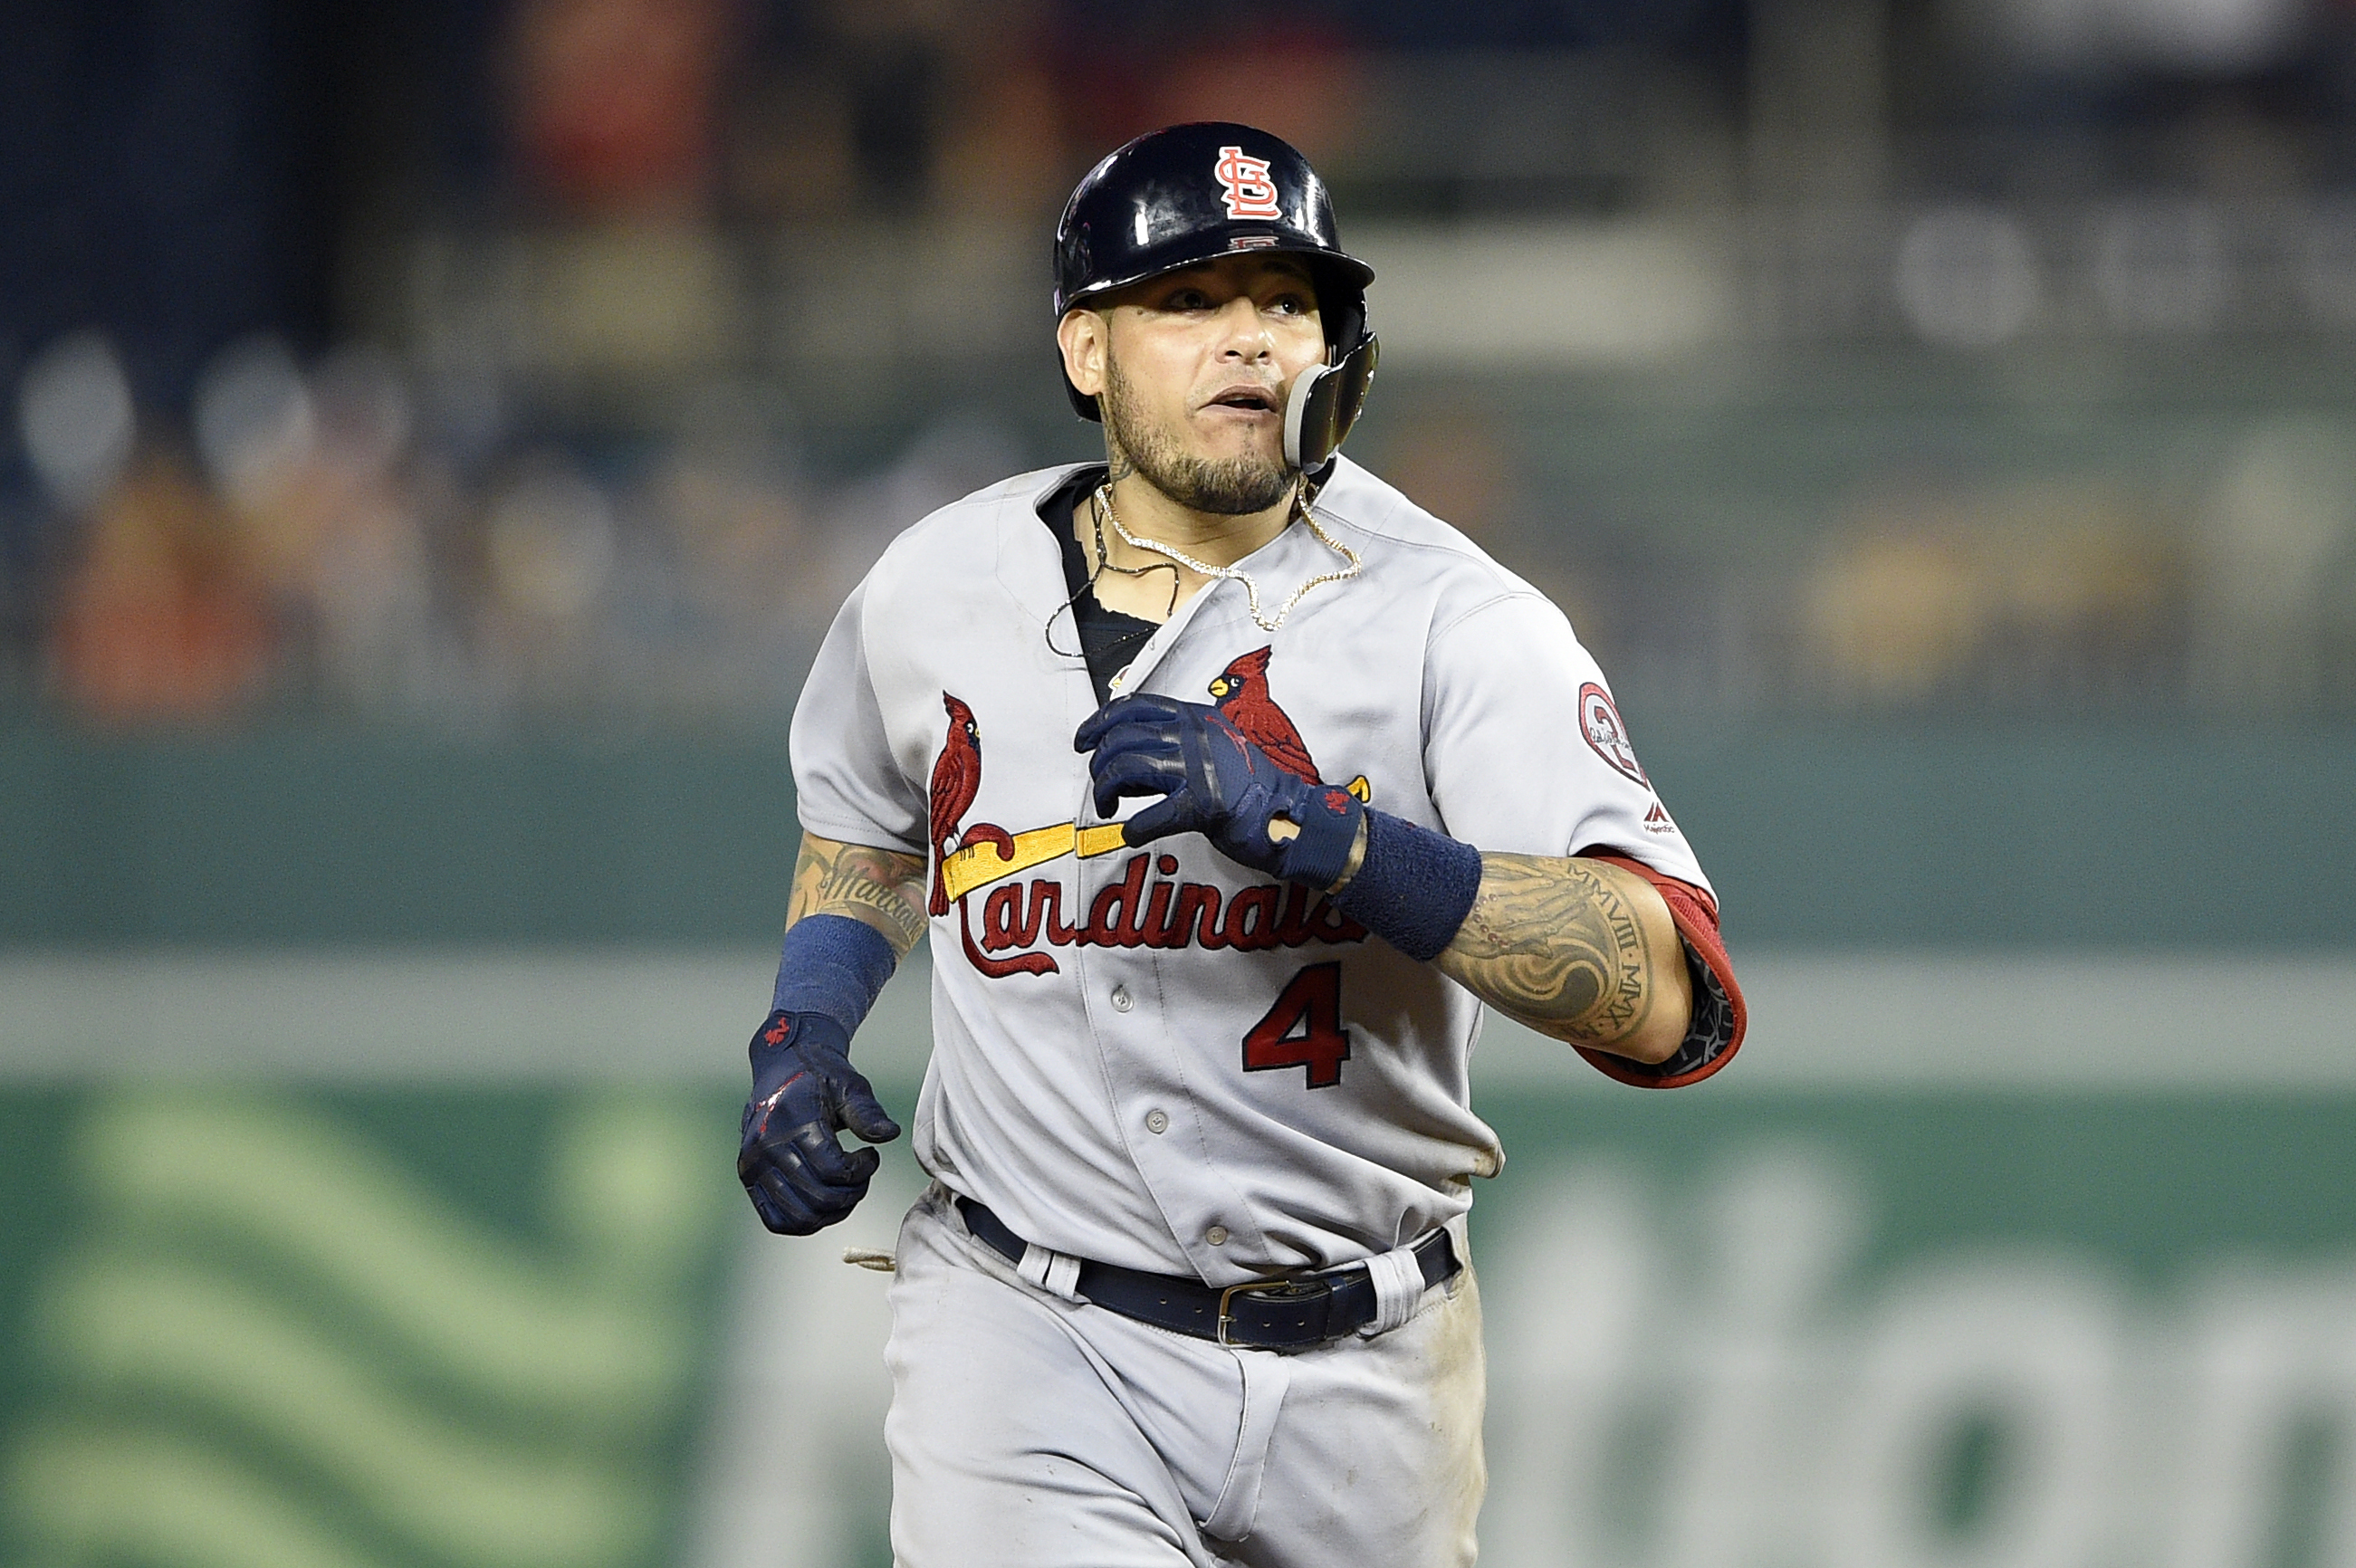 Clemente's Legacy: The stalwart leadership of Yadier Molina